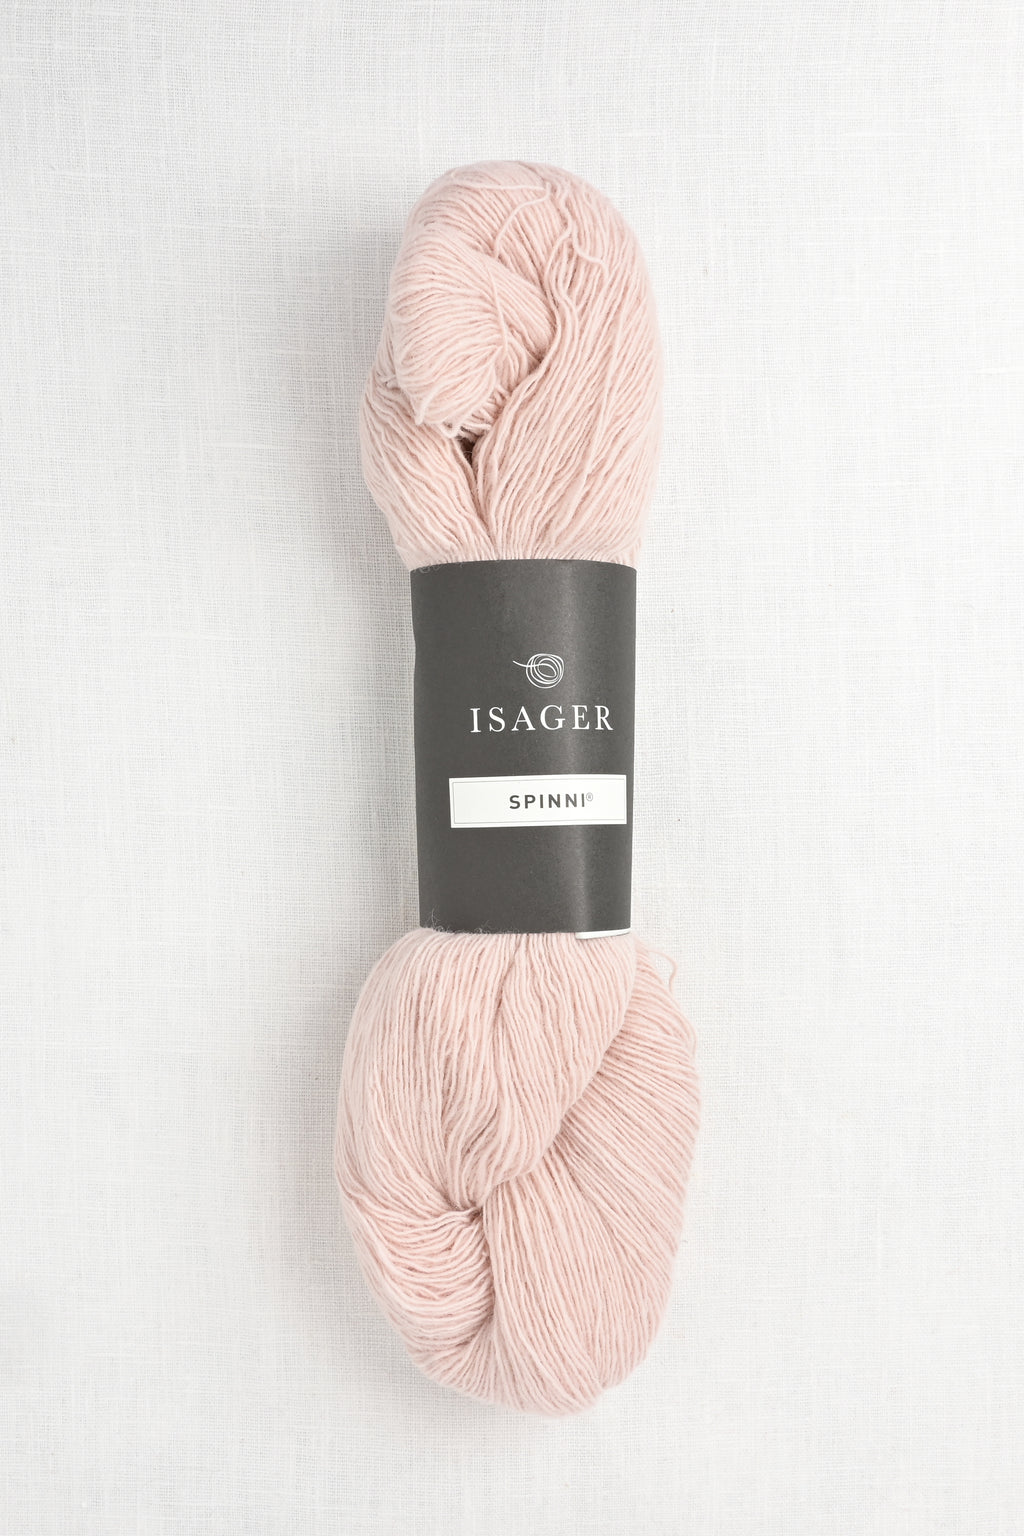 isager spinni 61 light pink 100g